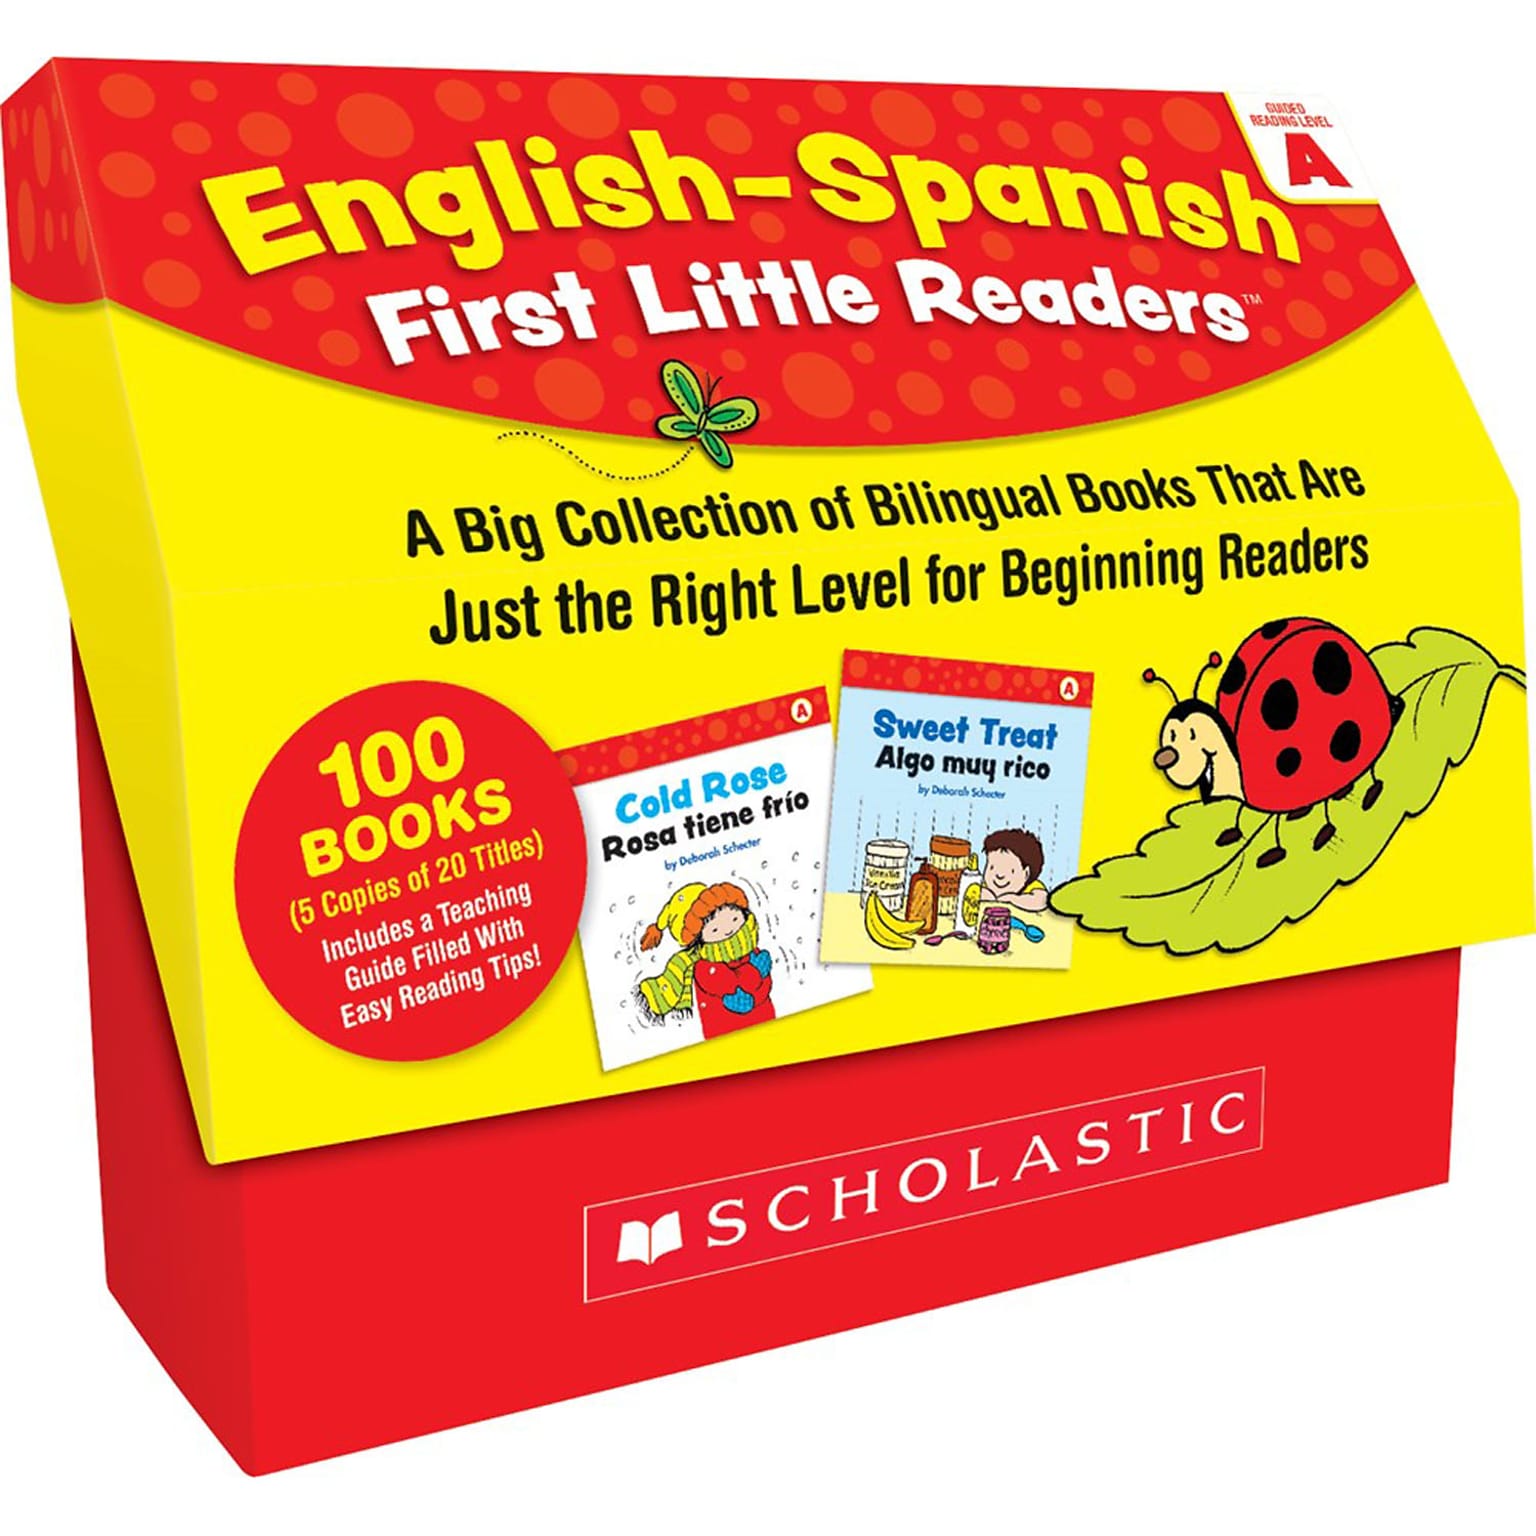 Scholastic Teacher Resources English-Spanish First Little Readers: Guided Reading Level A Classroom Set